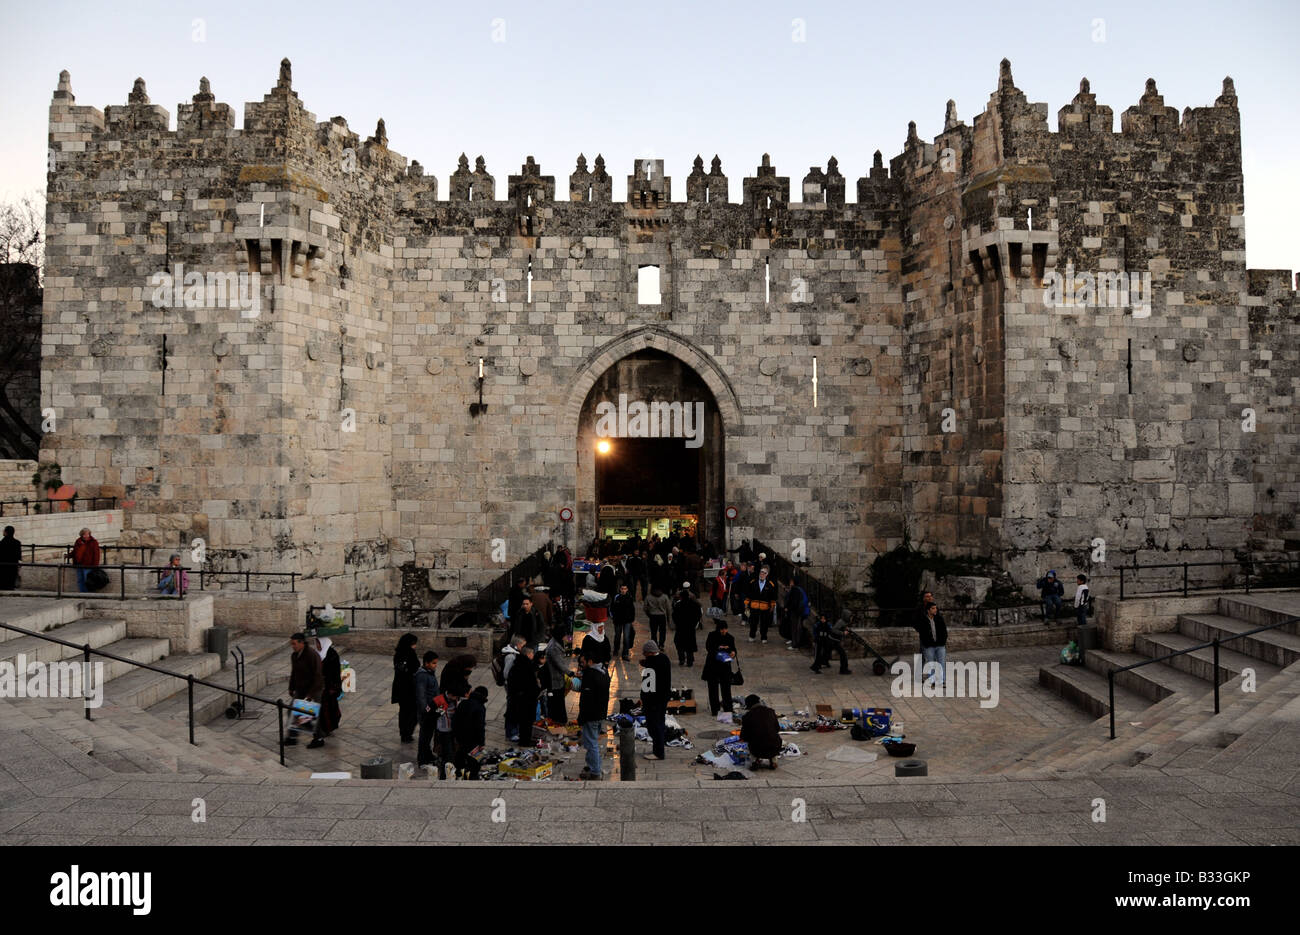 The Damascus Gate of Jerusalem's Old City, the main entrance to the Arab Quarter market, built in 1537. Stock Photo